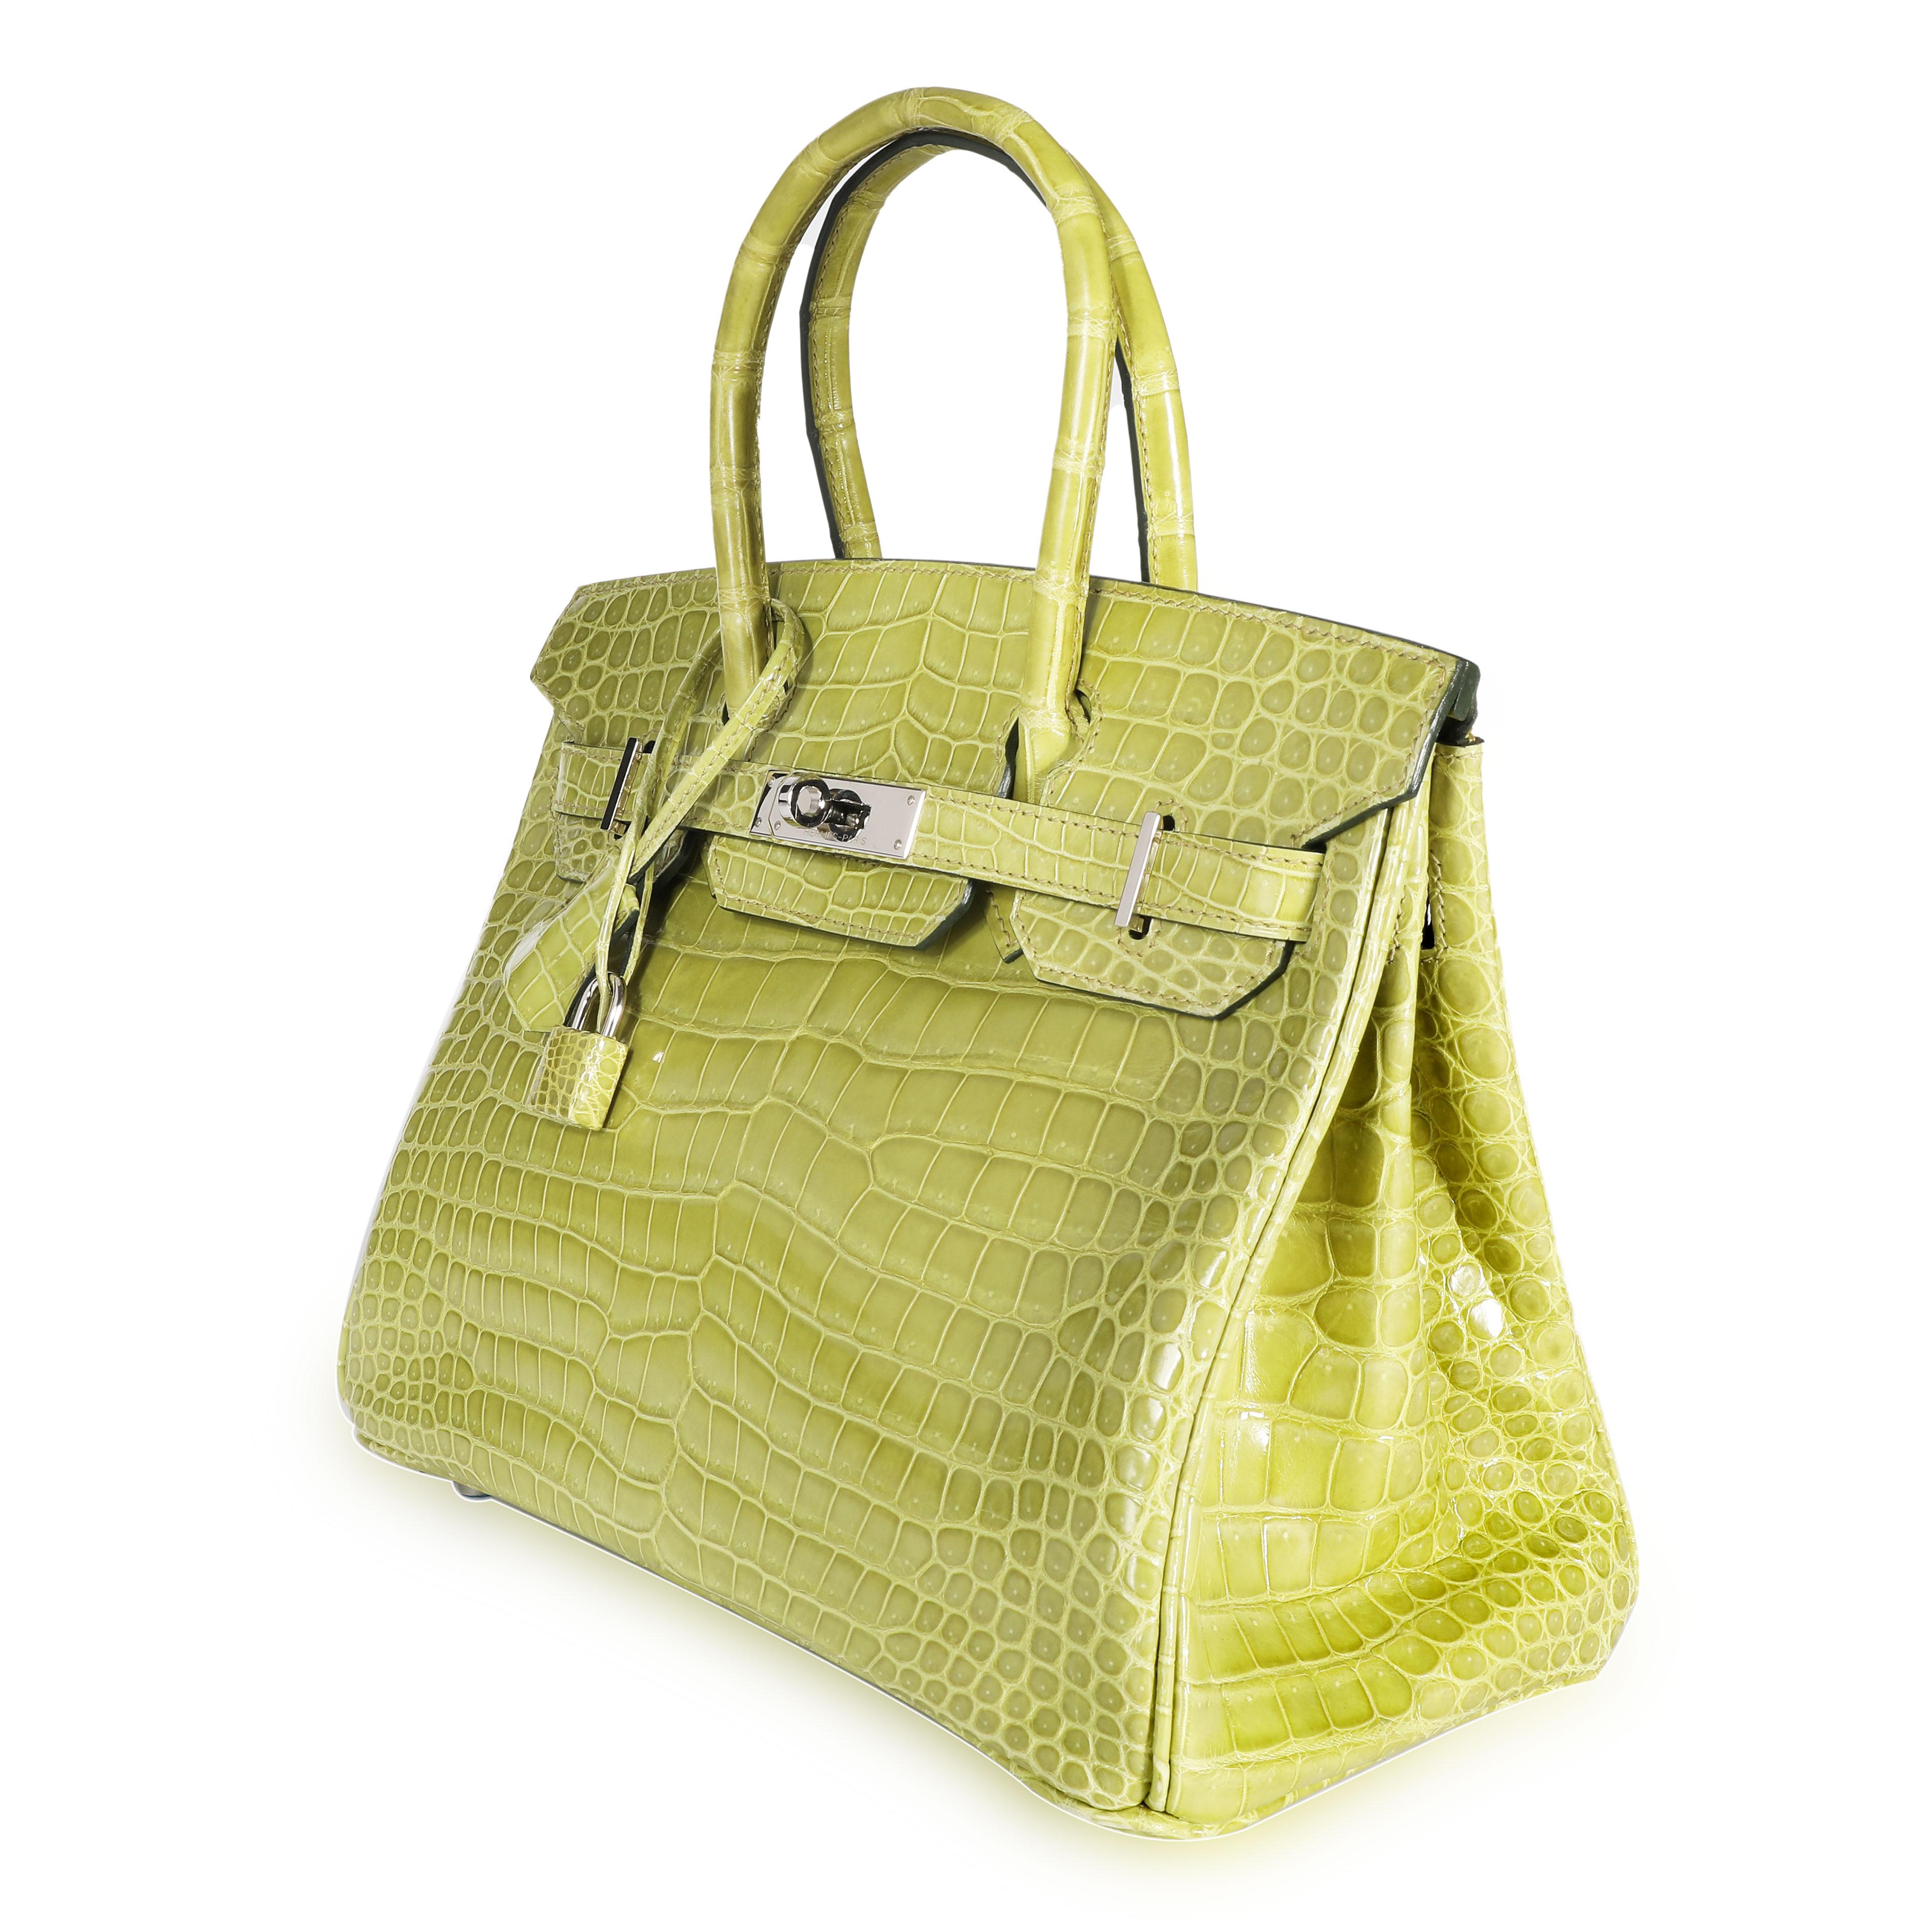 Listing Title: Hermès Shiny Vert Anis Porosus Crocodile Birkin 30 PHW
SKU: 108495

Condition Description: The holy grail of handbags: the Hermès Birkin. First introduced in 1984, the Birkin is crafted entirely by hand over the course of 18 hours.